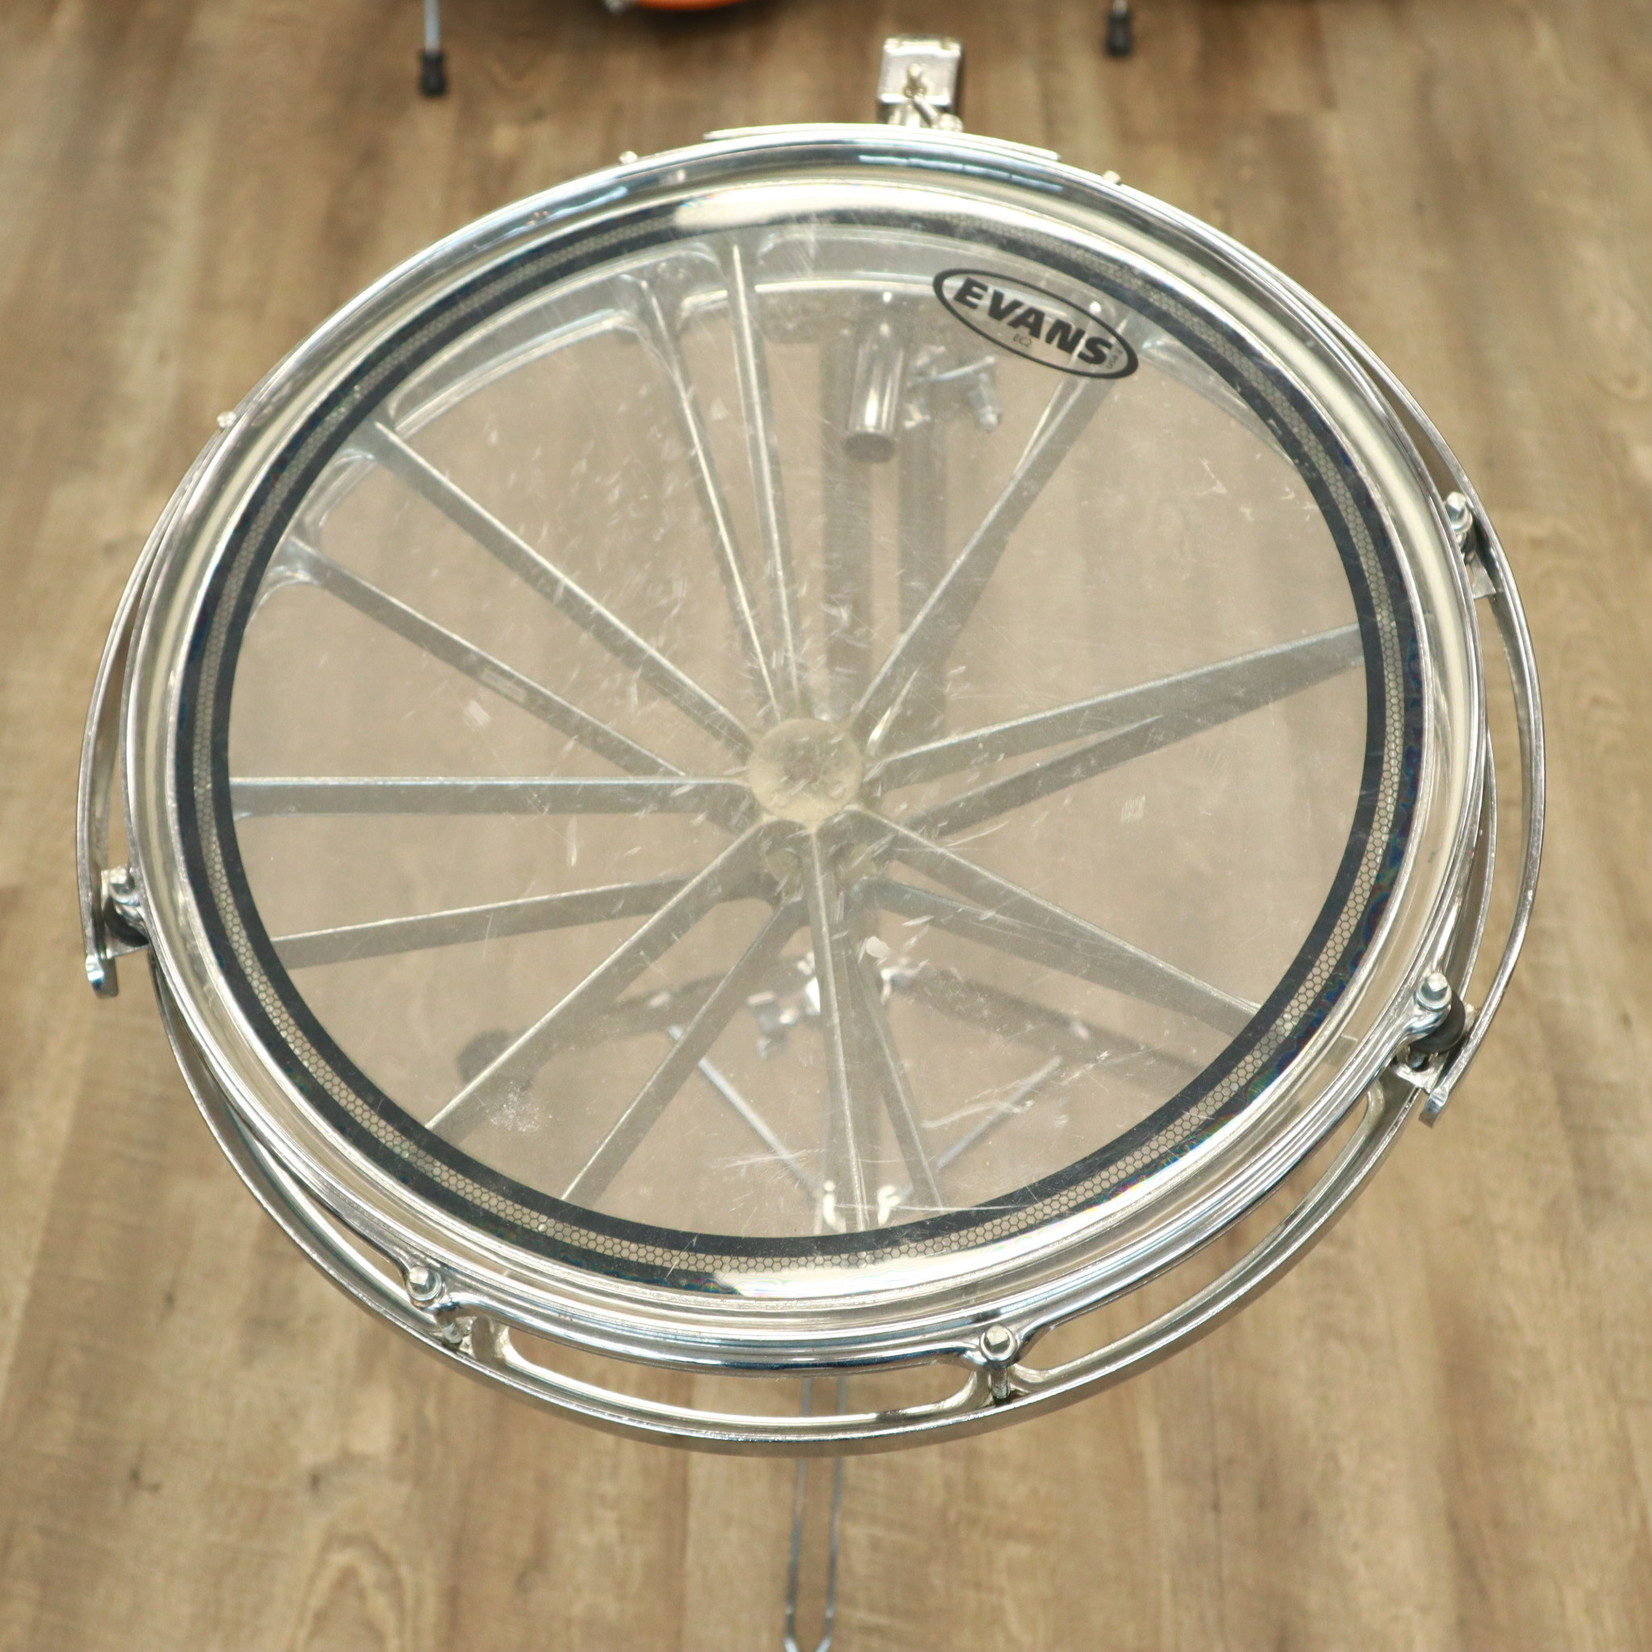 Remo Used 16" Remo Stationary RotoTom w/ Rims Mount & Pearl Bracket